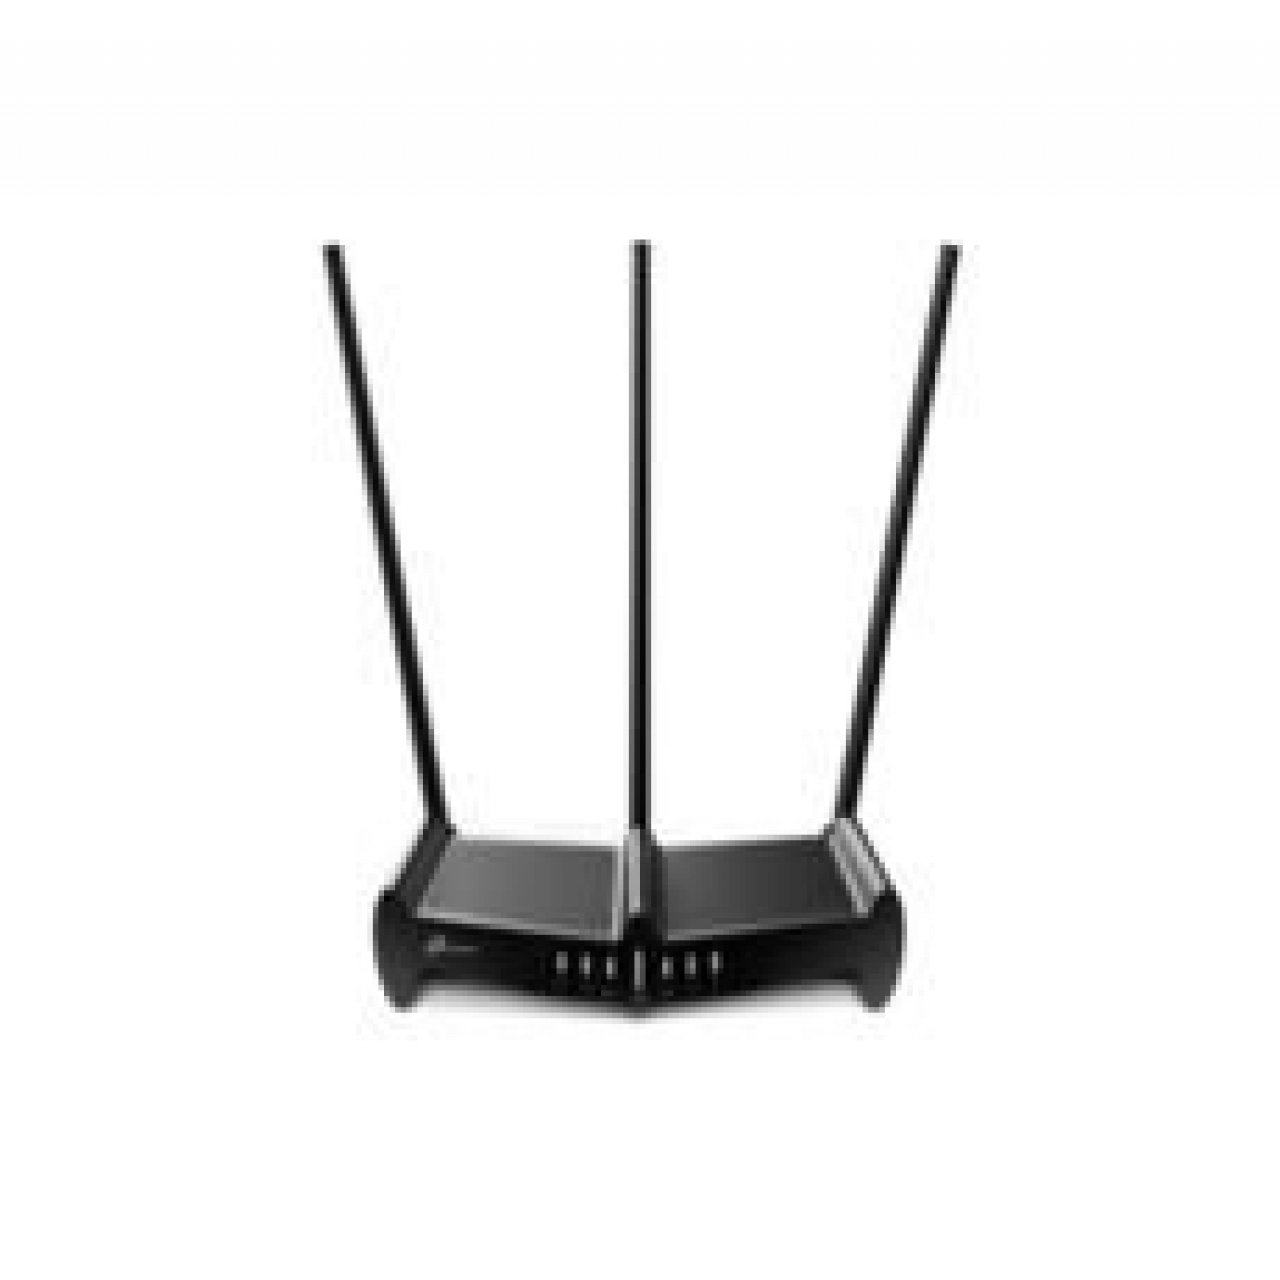 TP-LINK N450 High Power Wi-Fi Router